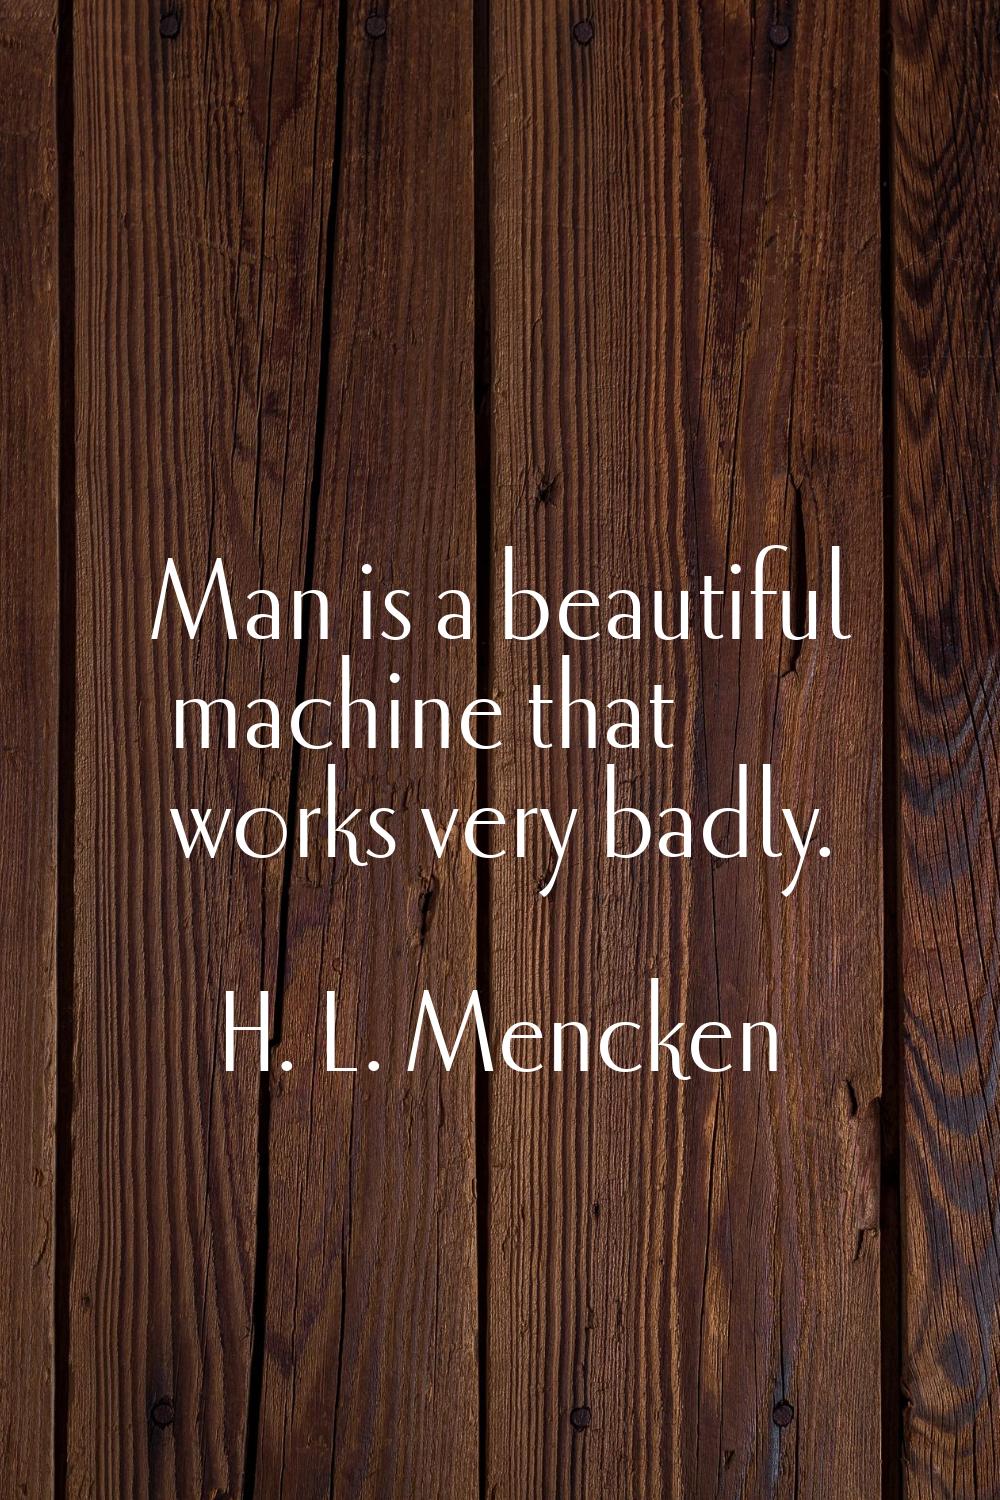 Man is a beautiful machine that works very badly.